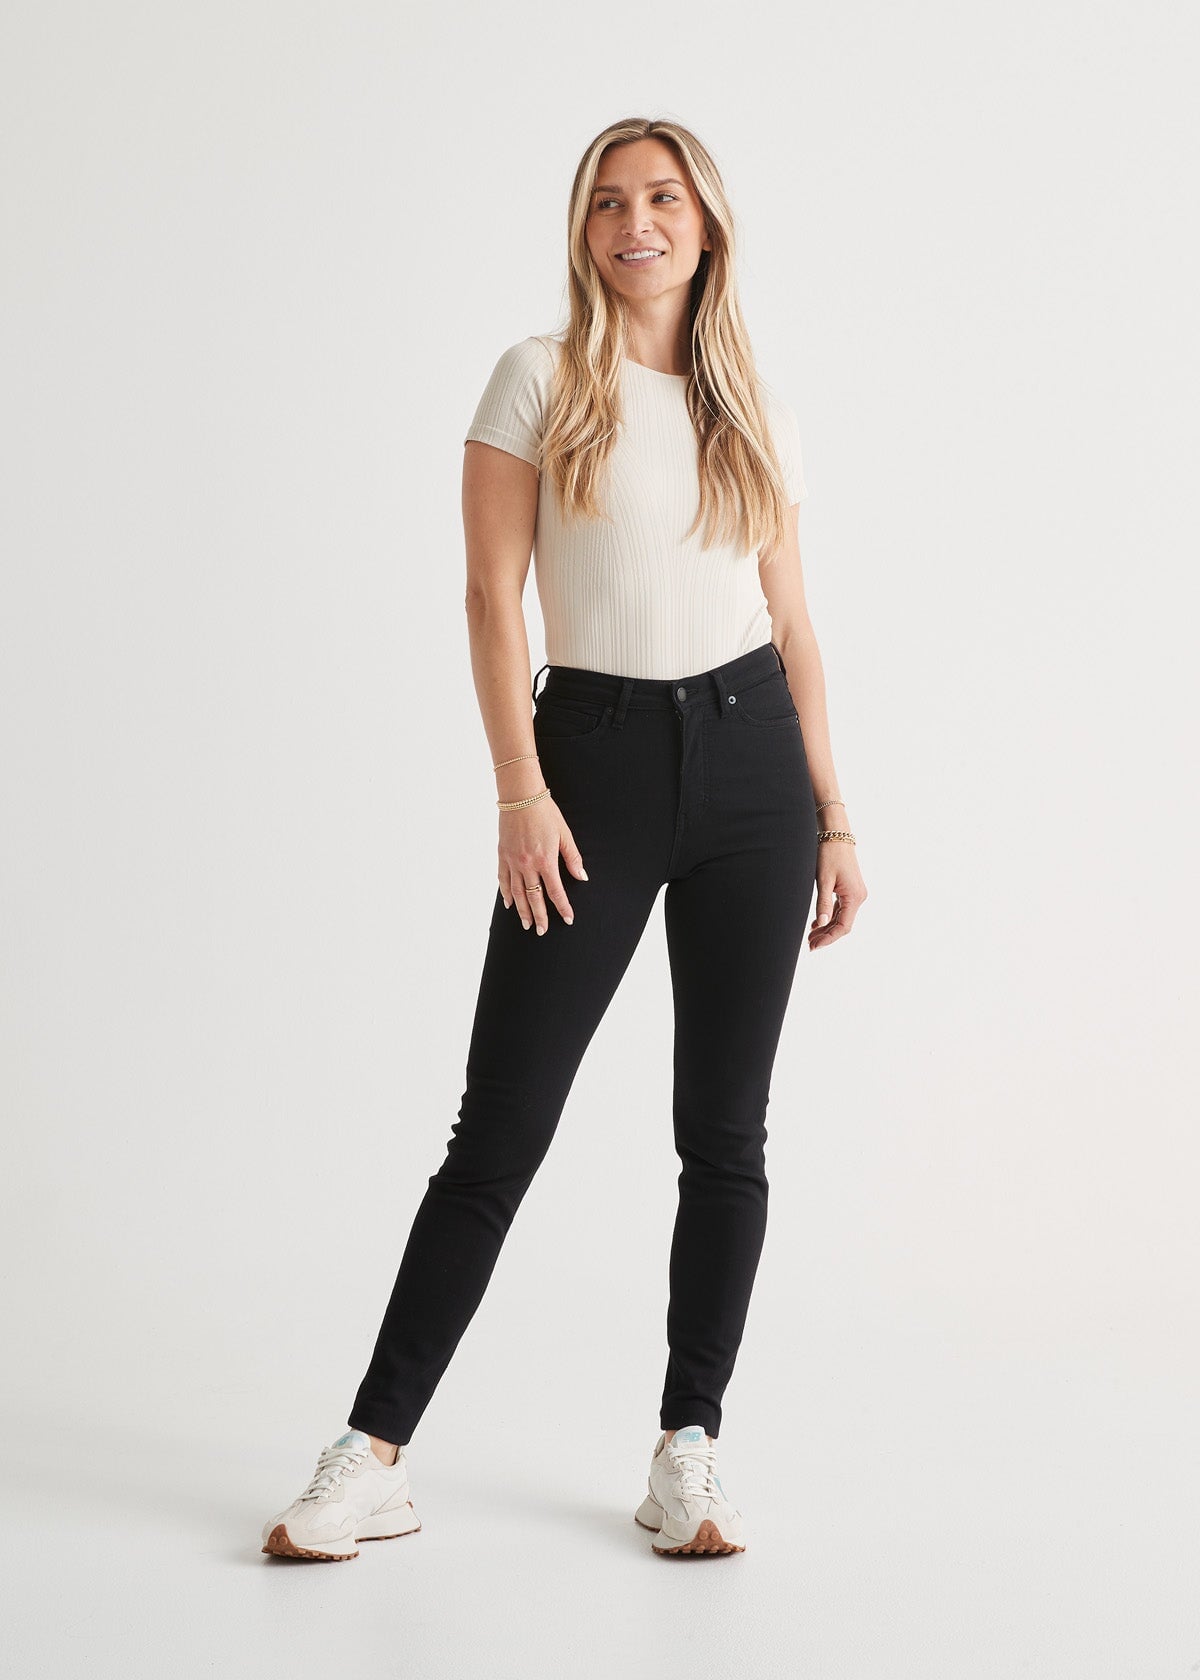 Black High Waisted Jeans for Women